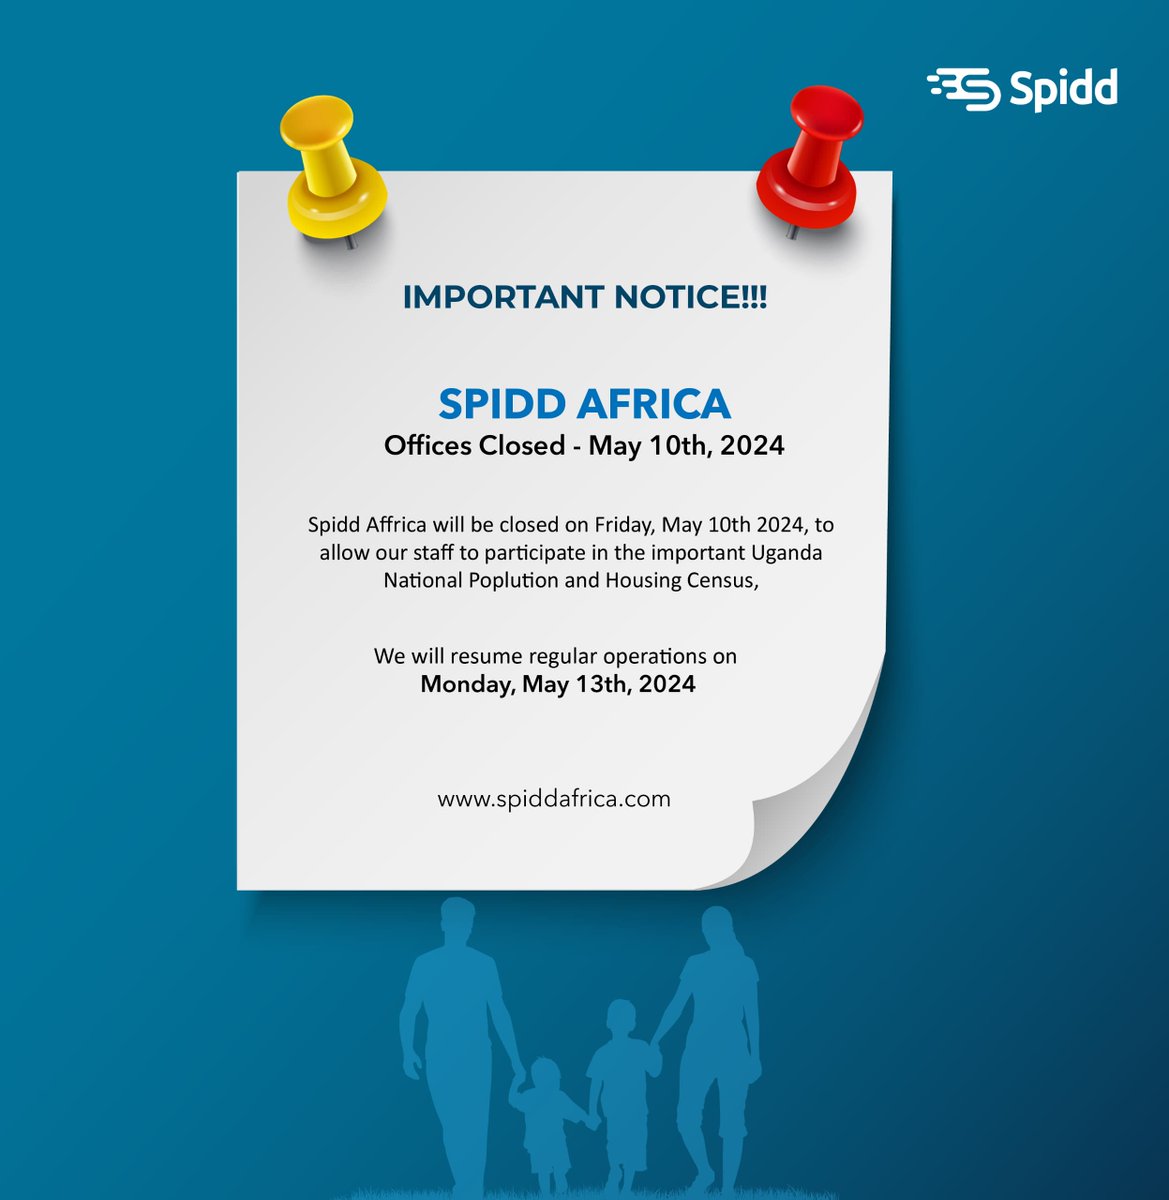 Spidd Africa will be closed Today Friday, May 10th, 2024, to allow our staff to participate in the important Uganda National Population and Housing Census. For urgent matters on May 10th, please contact us via email at info@spiddafrica.com #UgandaNationalCensus #BeCounted